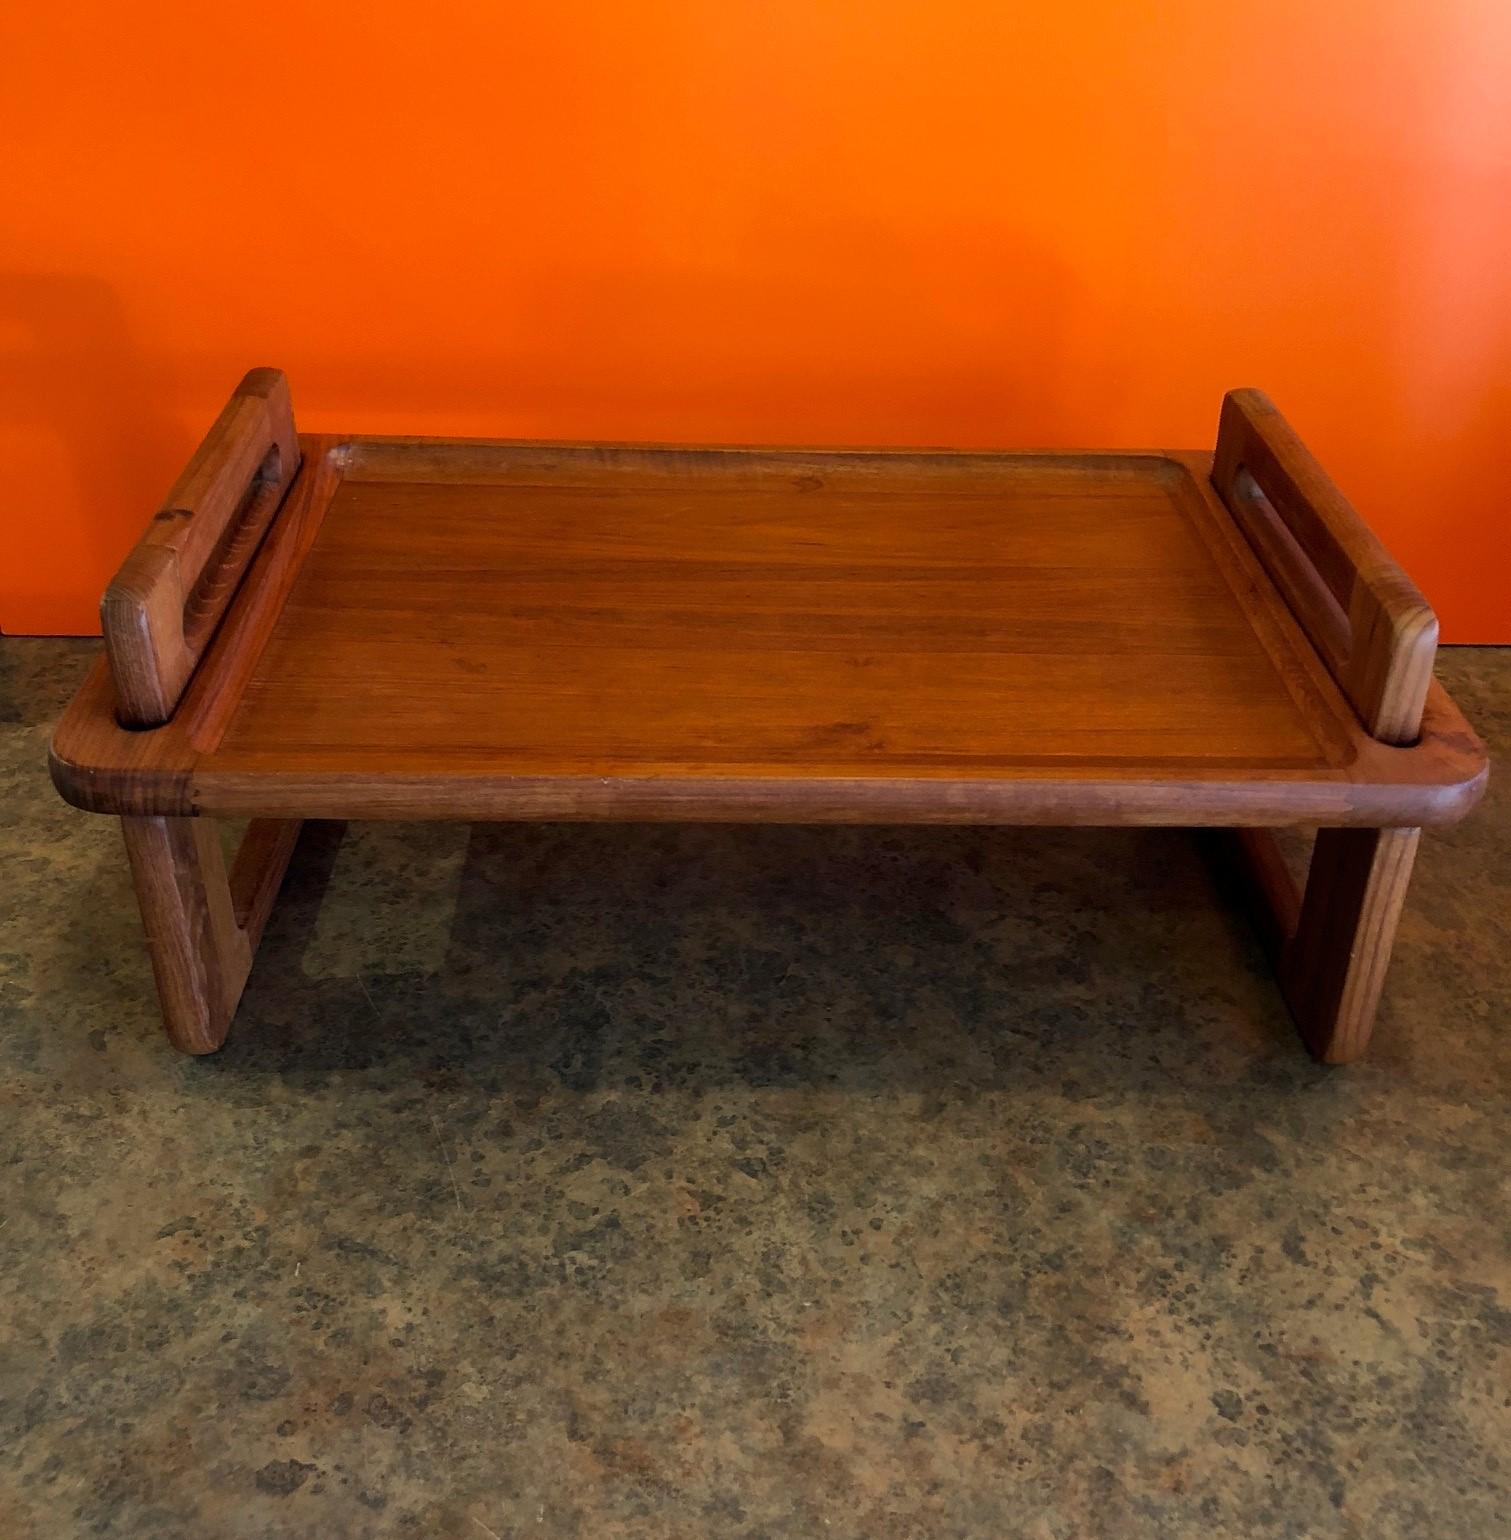 A very nice convertible breakfast tray made of teak wood by Dansk, circa 1970s. The two support legs are removable allowing the tray to function as a flat tray. Unique locking ball bearing design.